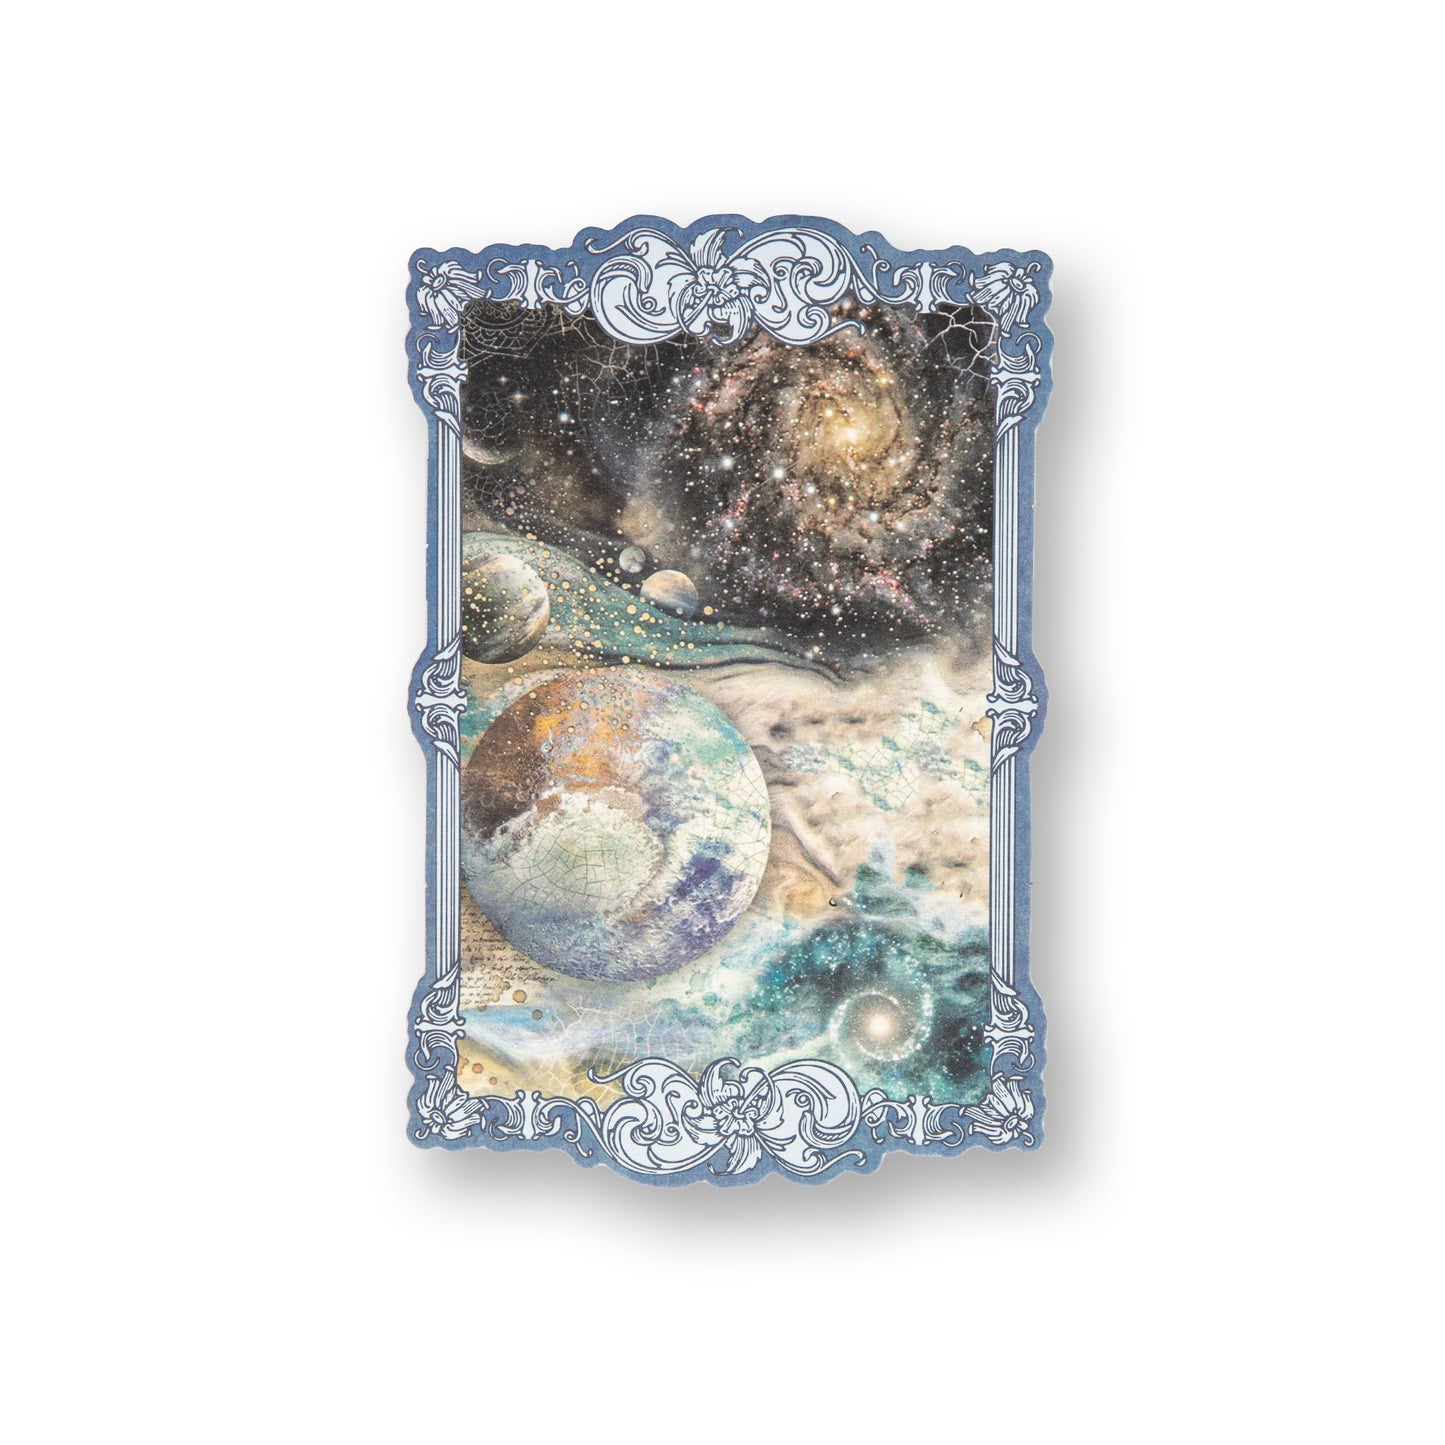 Starry Sky Reverie Scrapbooking Paper Pad - 20 Sheets